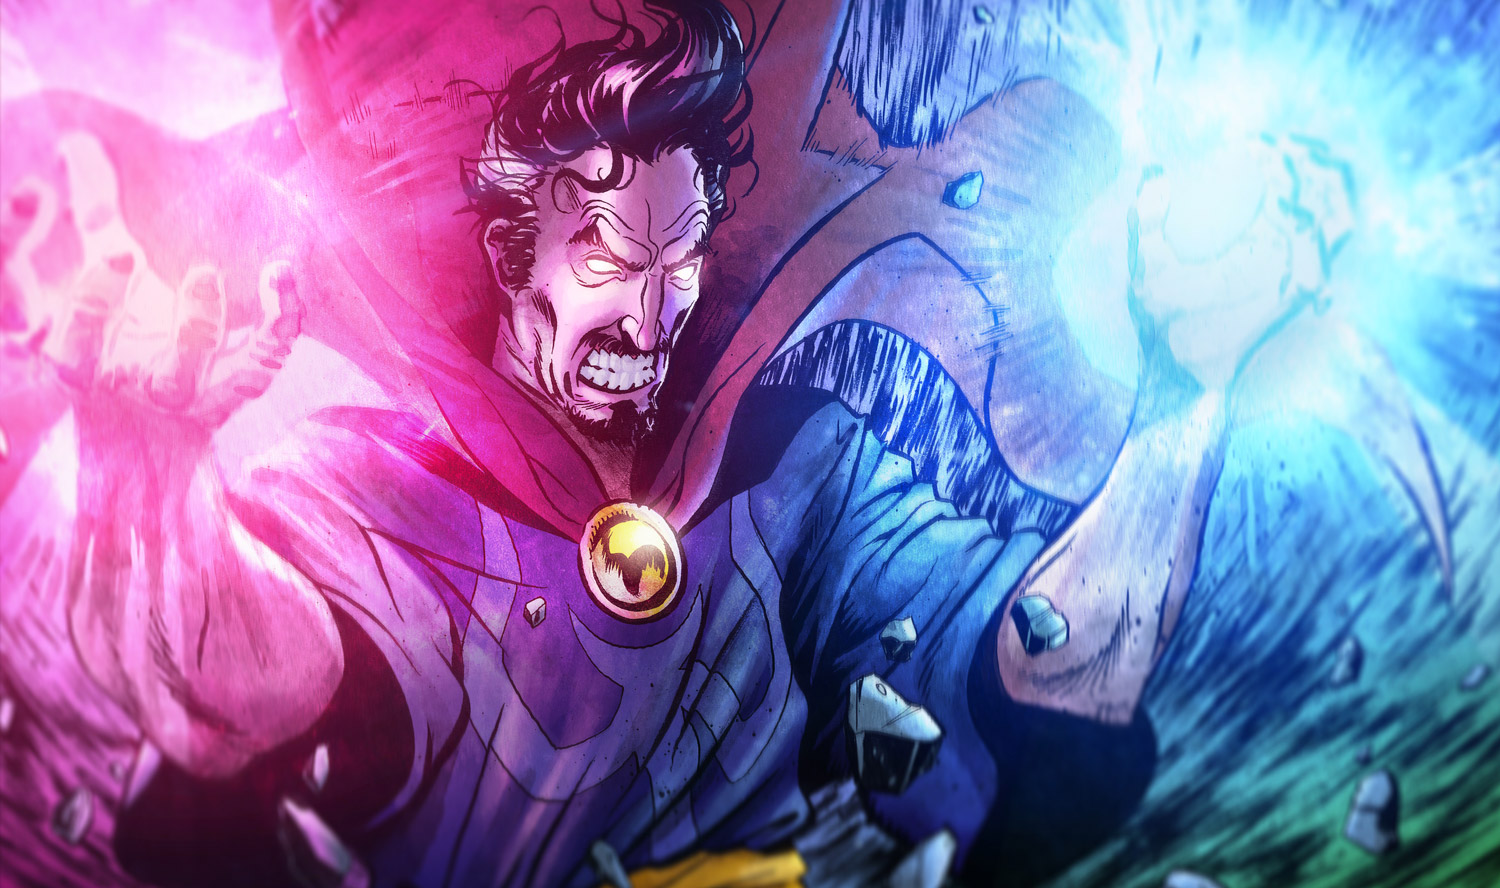 Who is Dr. Strange? by techgnotic on DeviantArt